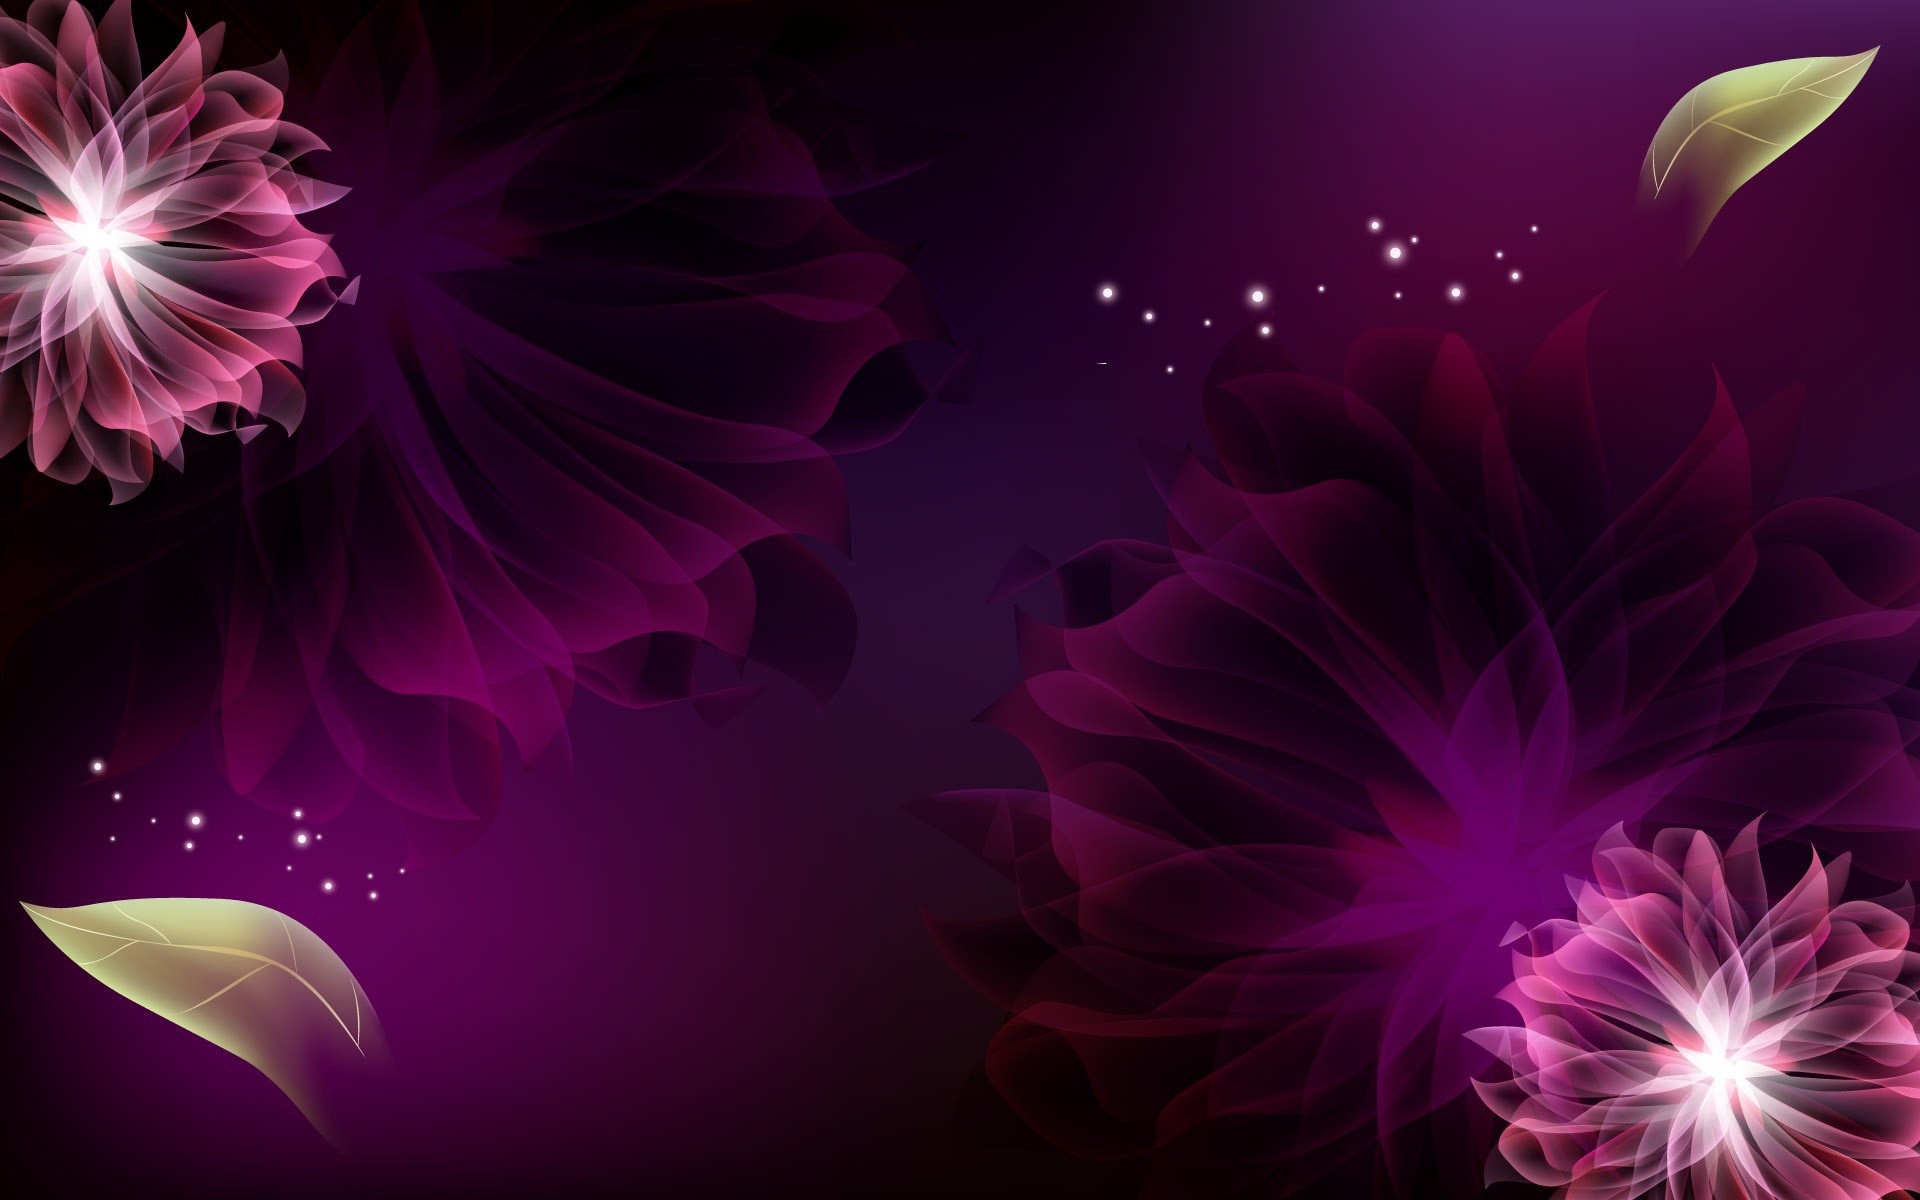 Abstract Flowers And Leaves Wallpaper Image